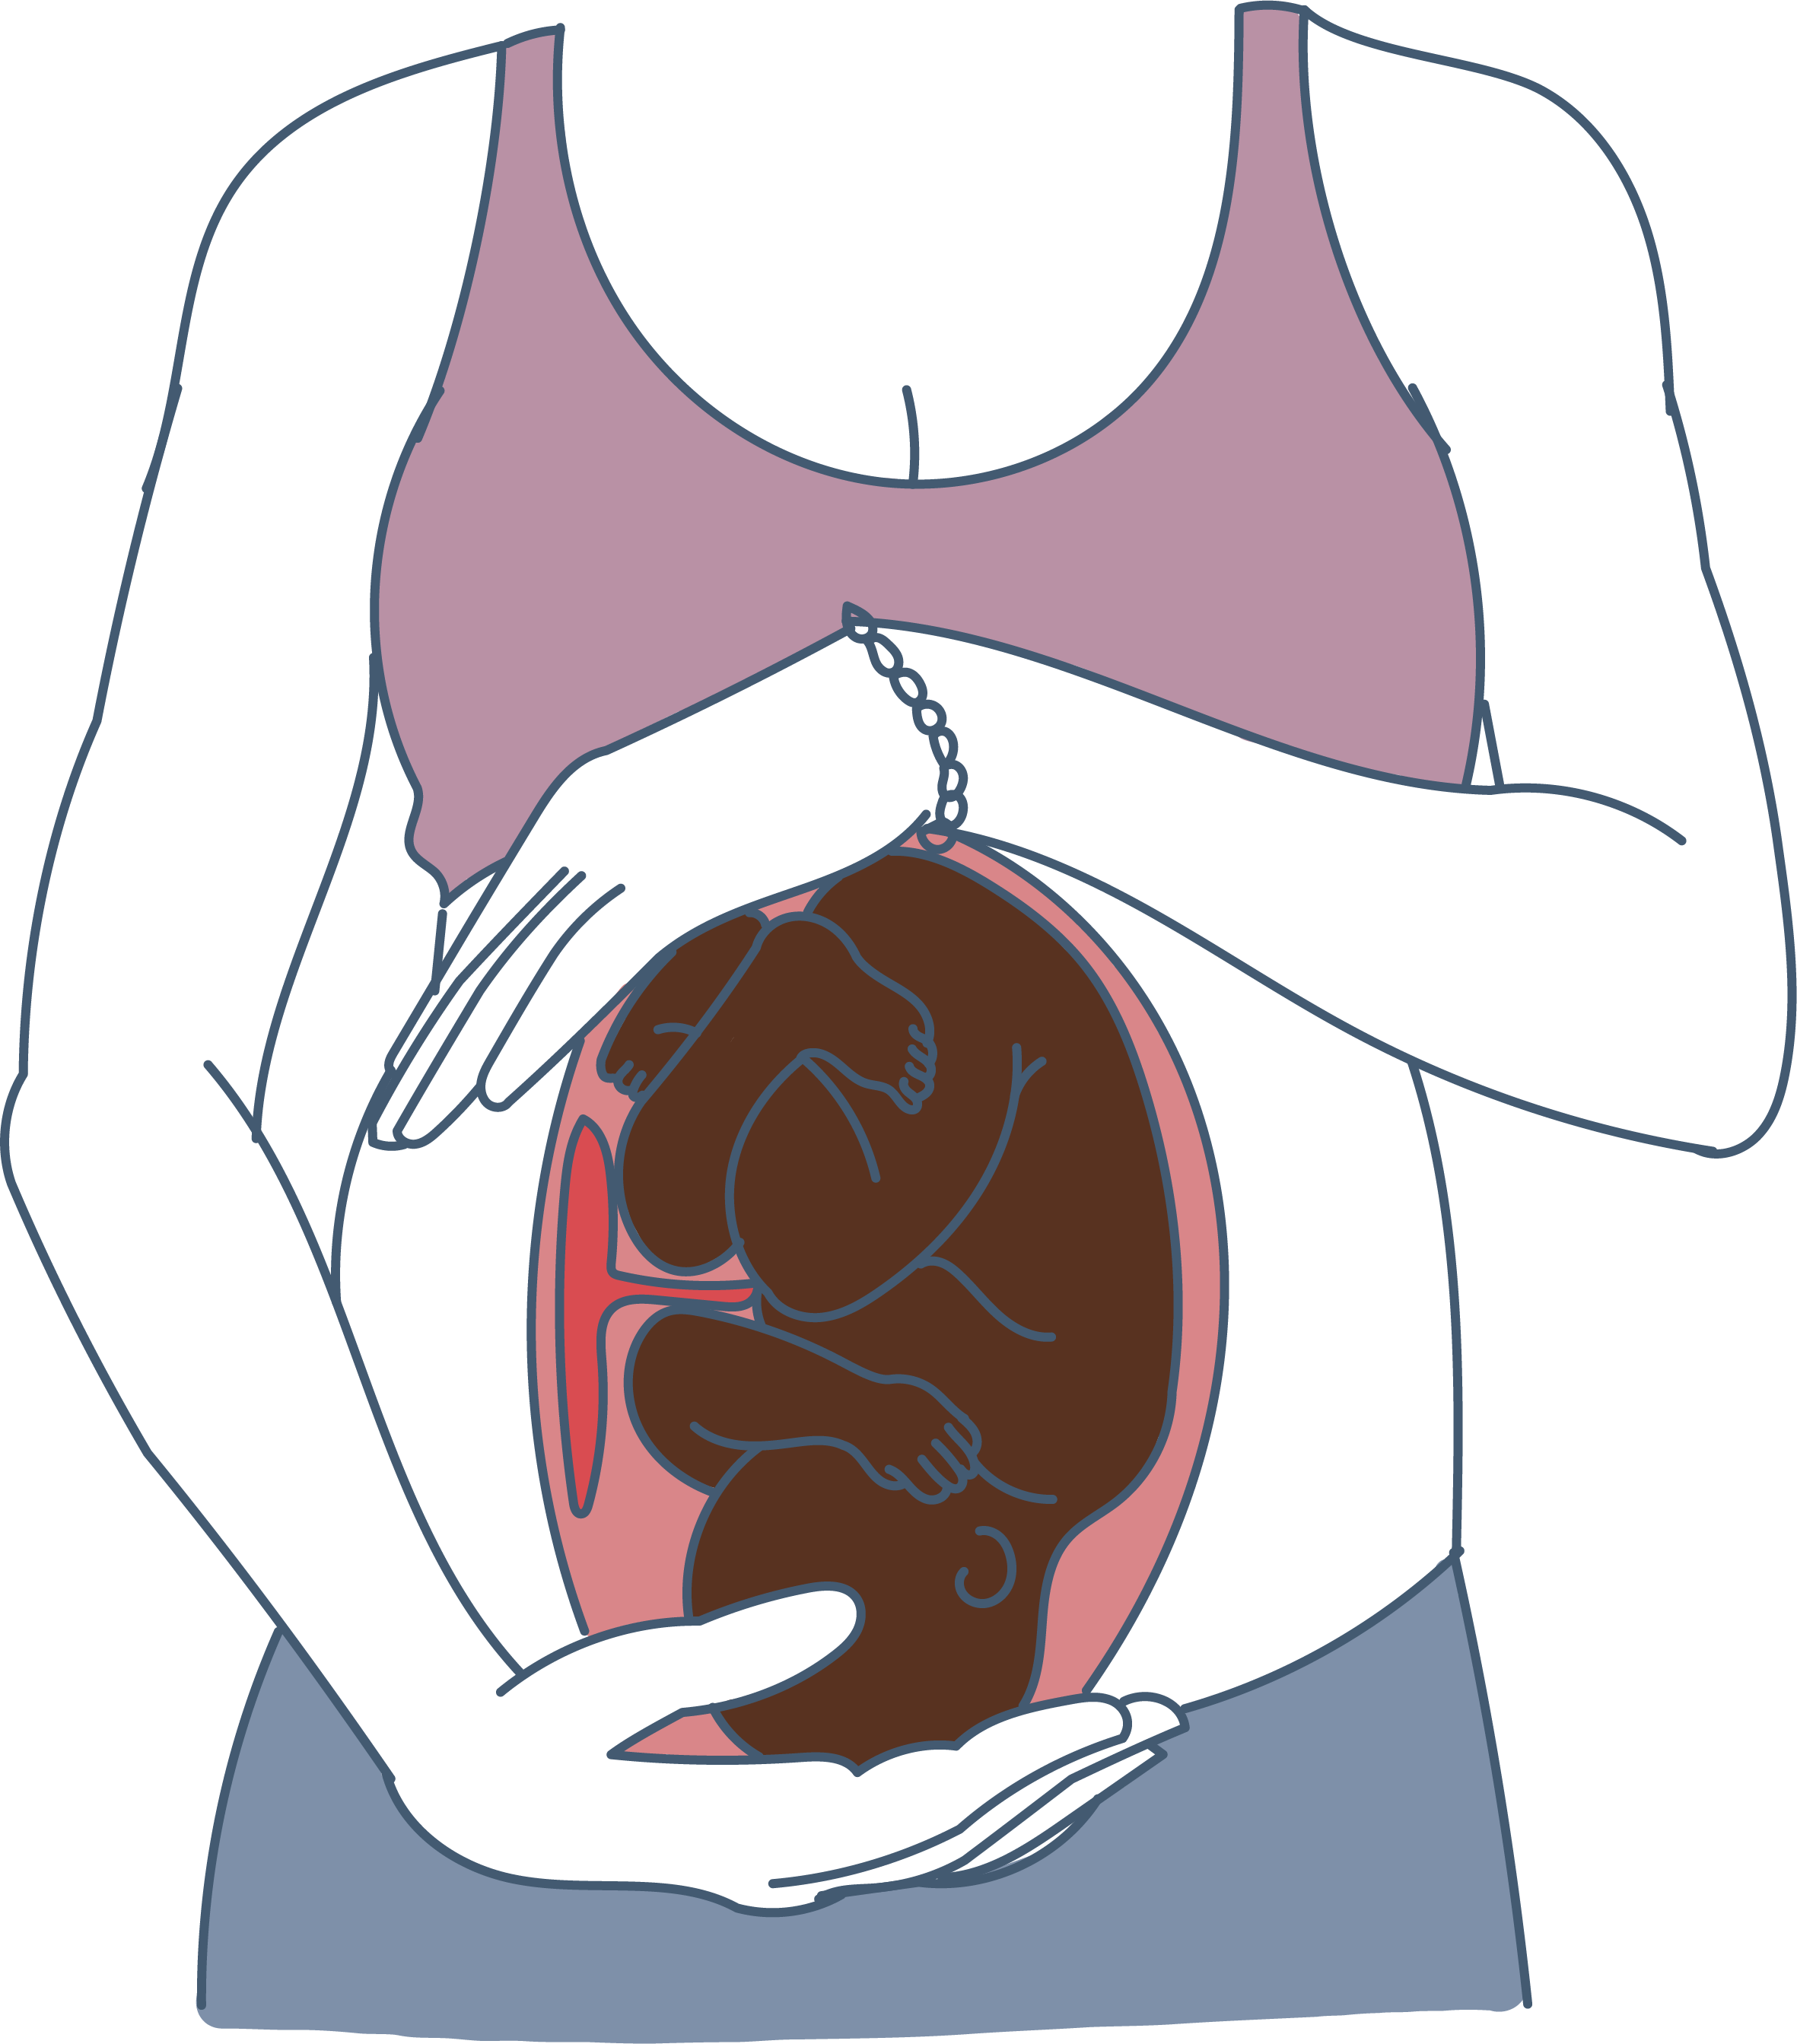 what is ceph presentation in pregnancy